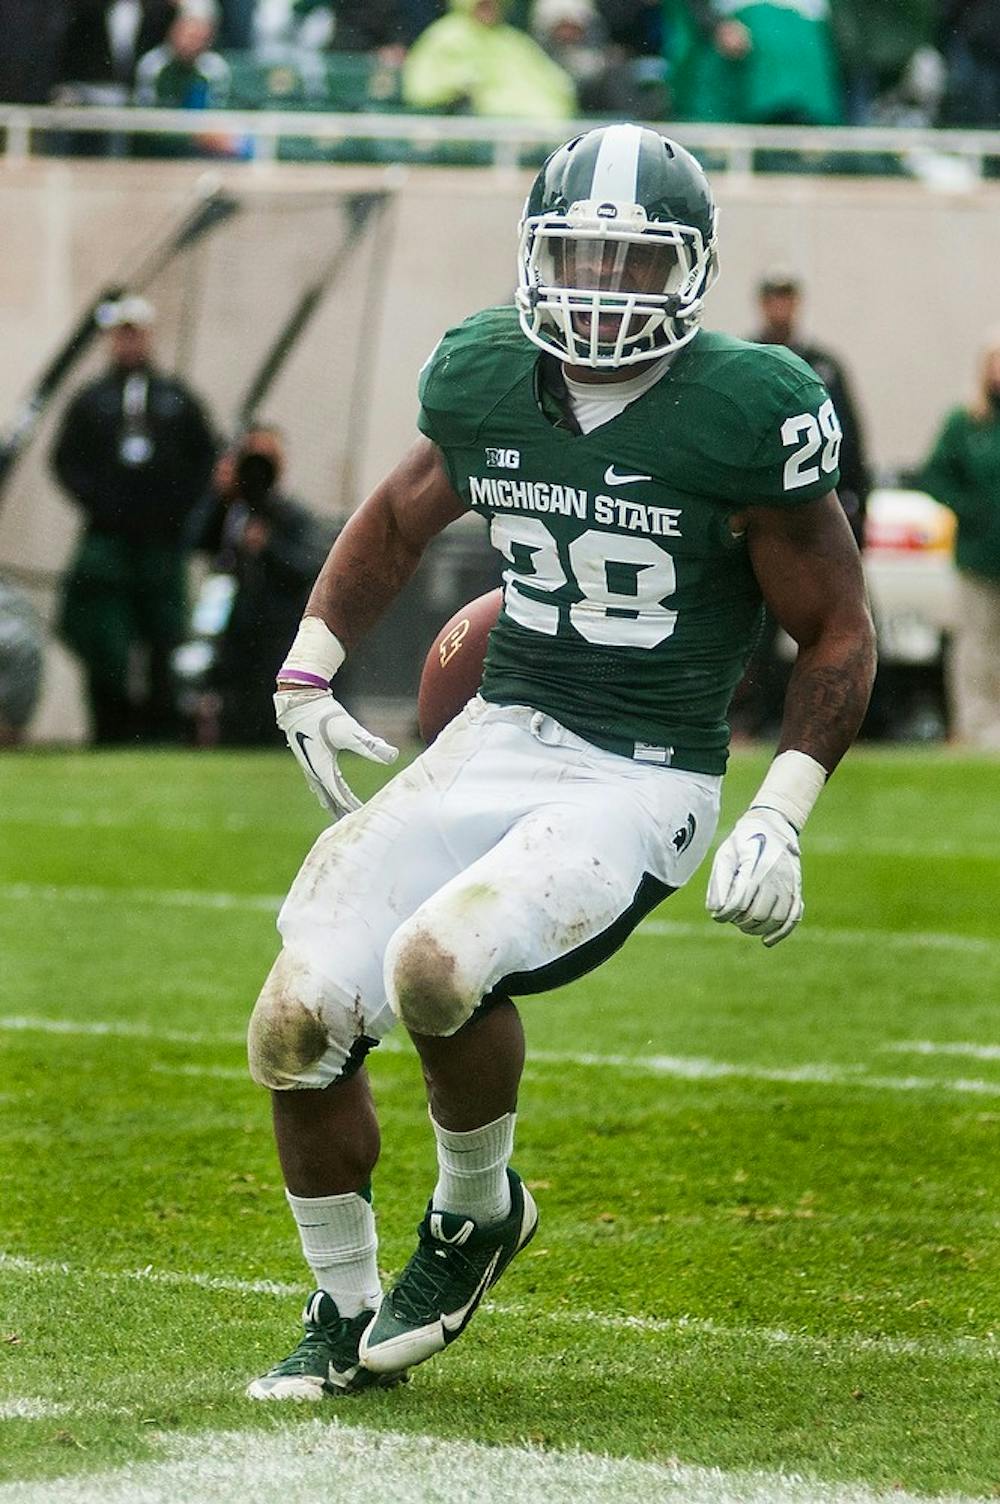 	<p>Senior linebacker Denicos Allen runs into the end zone for a touchdown after picking up a fumble during the game against Purdue, Oct. 19, 2013, at Spartan Stadium. The Spartans defeated the Boilermarkers, 14-0. Danyelle Morrow/The State News</p>